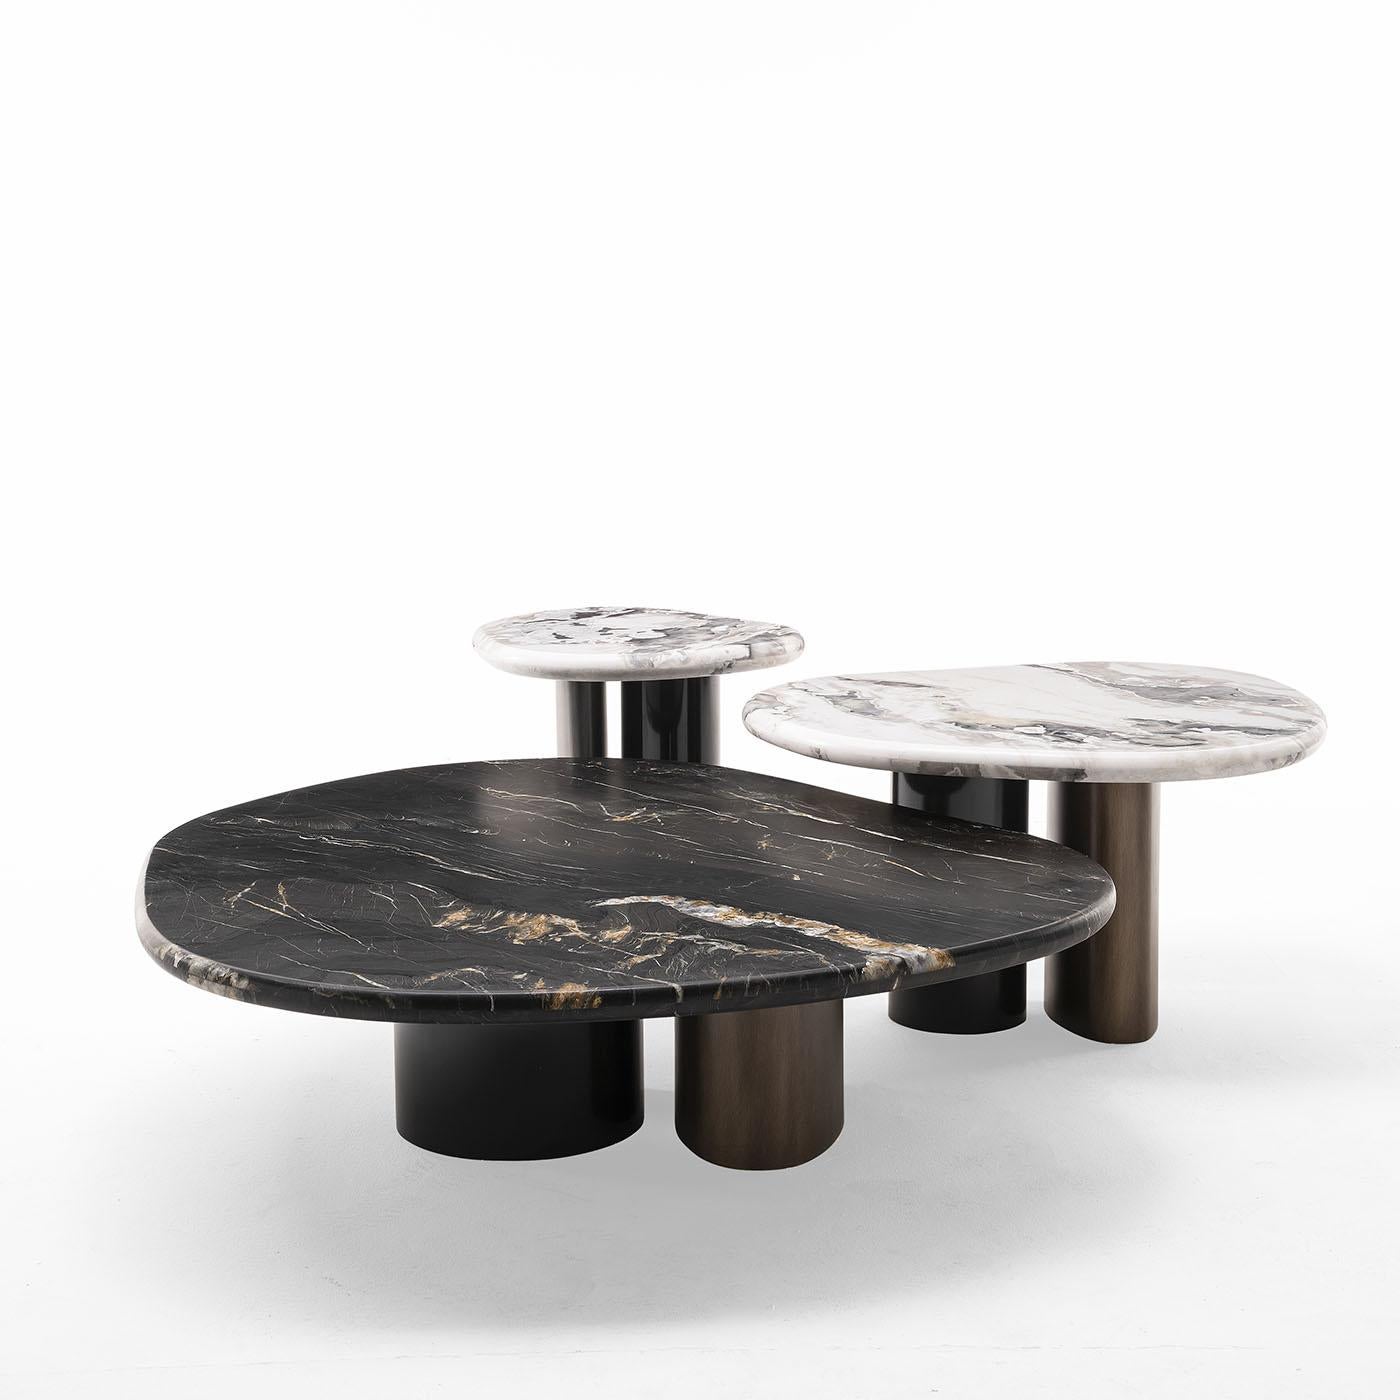 The ethereal charm of clouds and the concrete beauty of marble converge in this exclusive coffee table. Raised on a sculptural base consisting of a brushed-black round-cut leg and of an oval-cut golden leg, a prized Belvedere marble top enchants